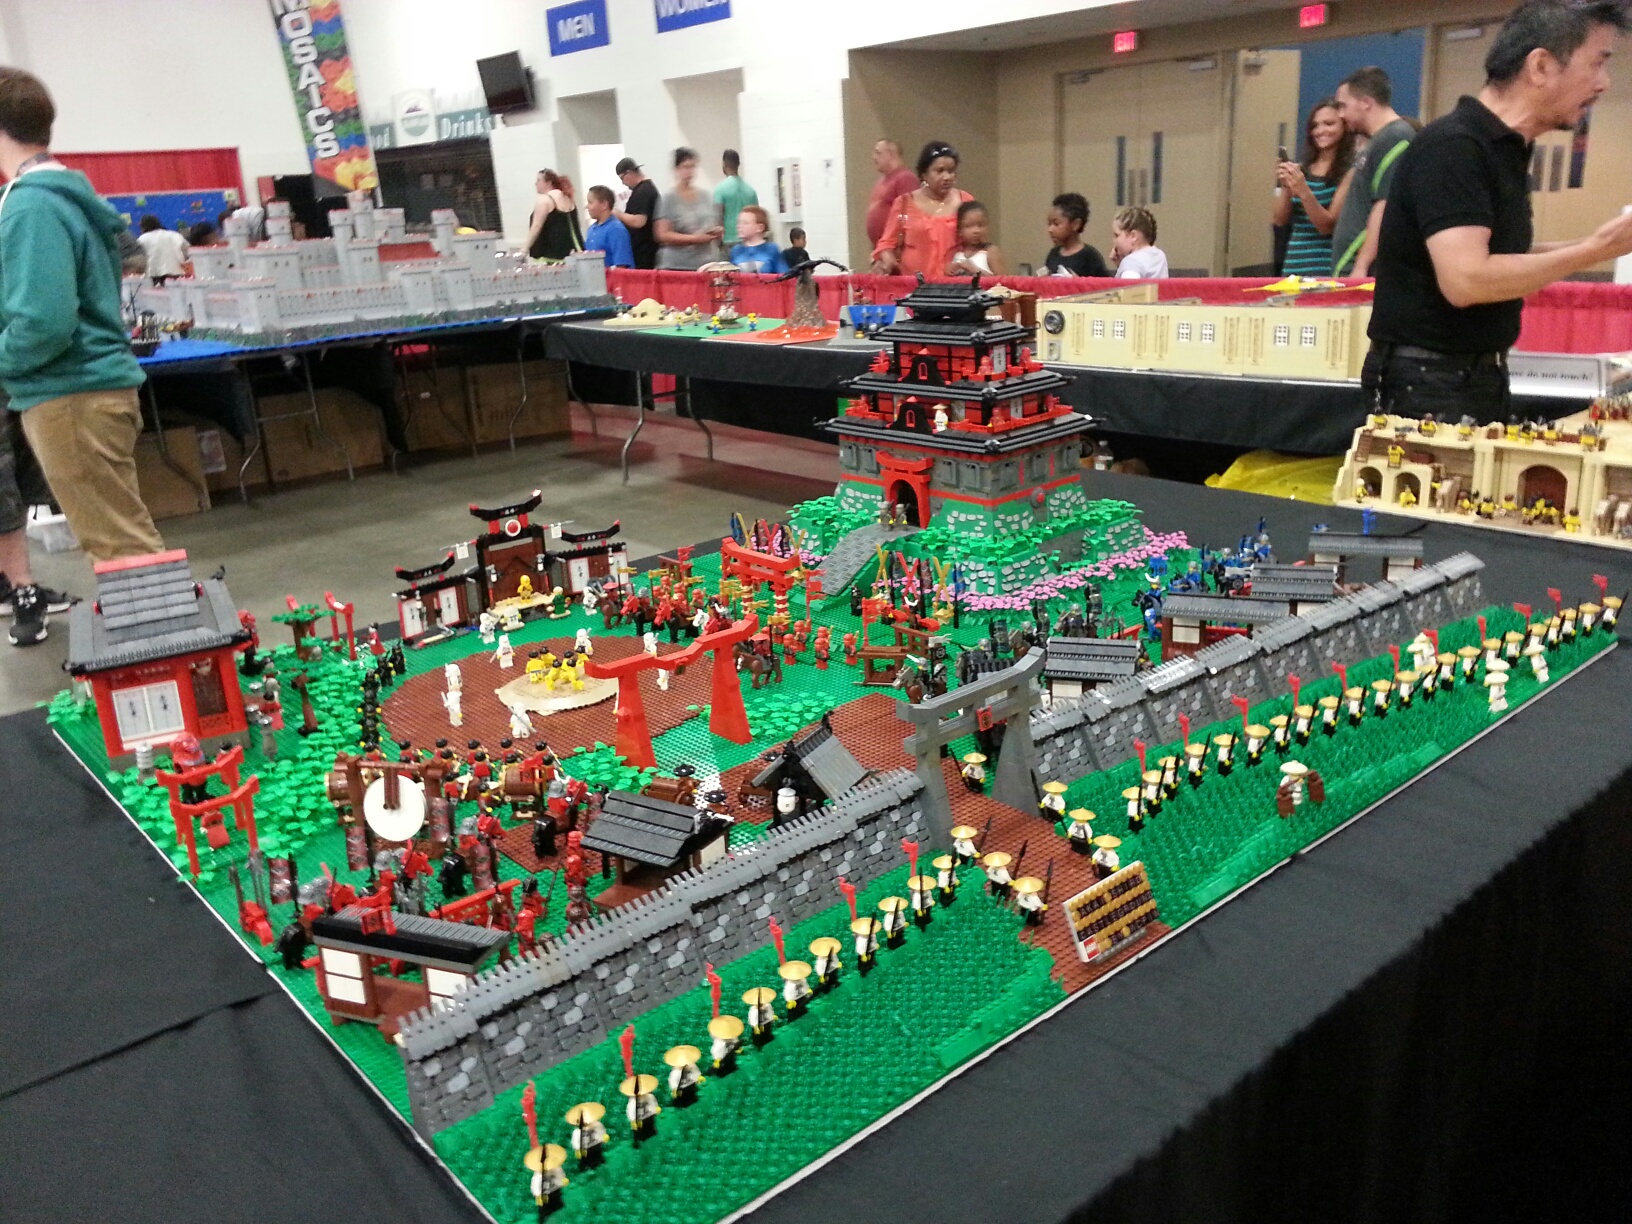 Brickfest Live! A Must For All Lego Fans!